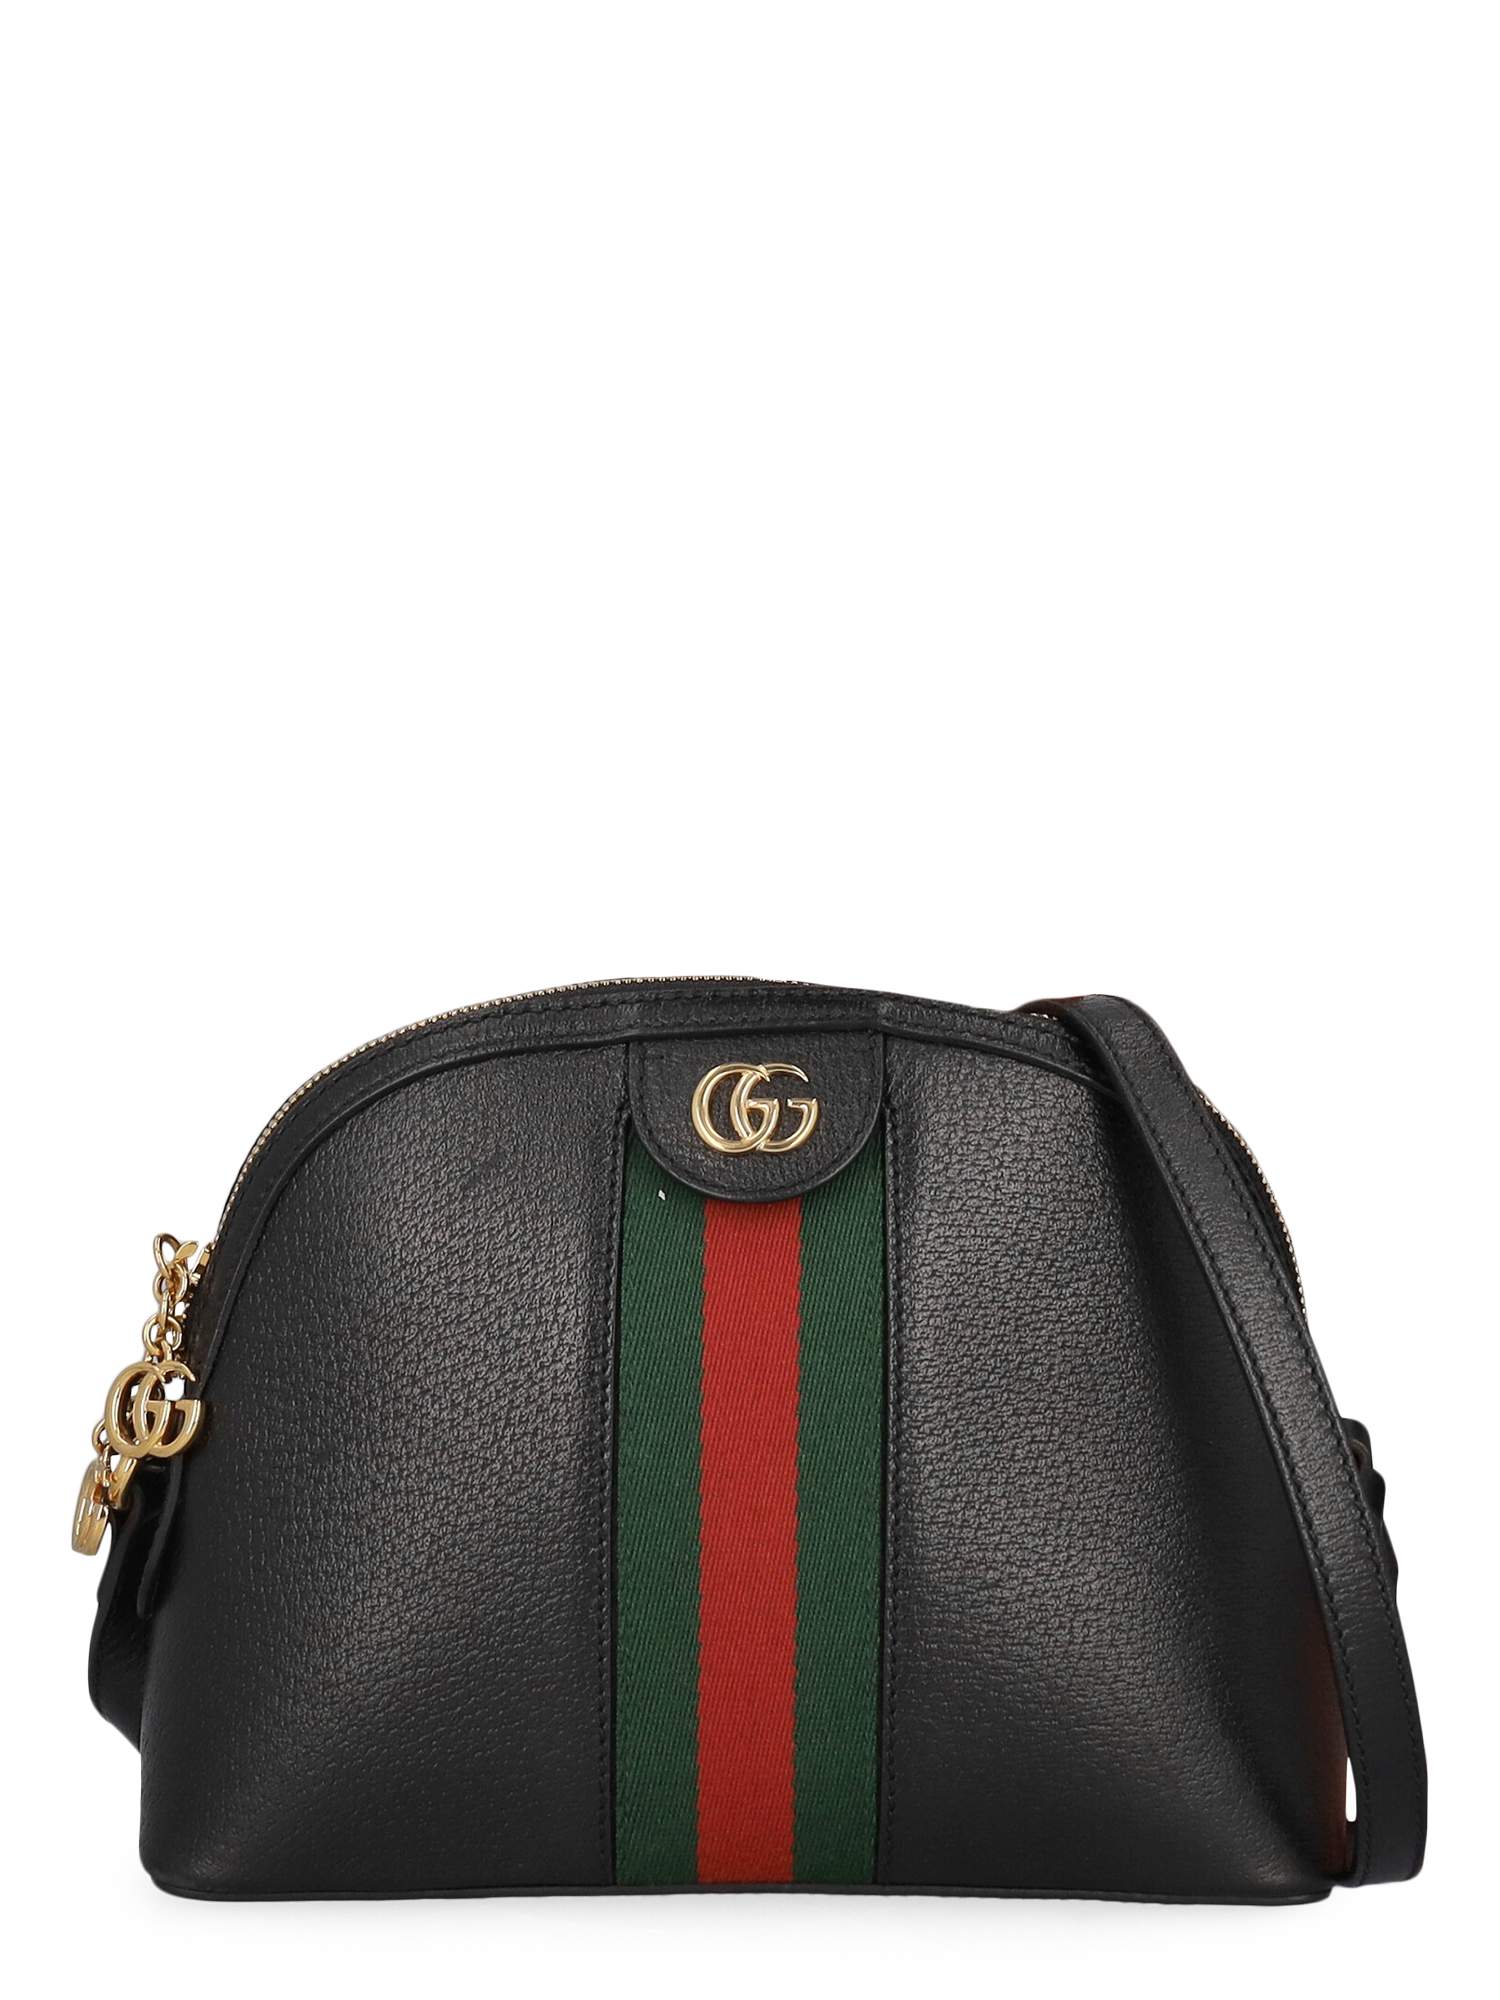 Pre-owned Gucci Women's Shoulder Bags -  - In Black Leather